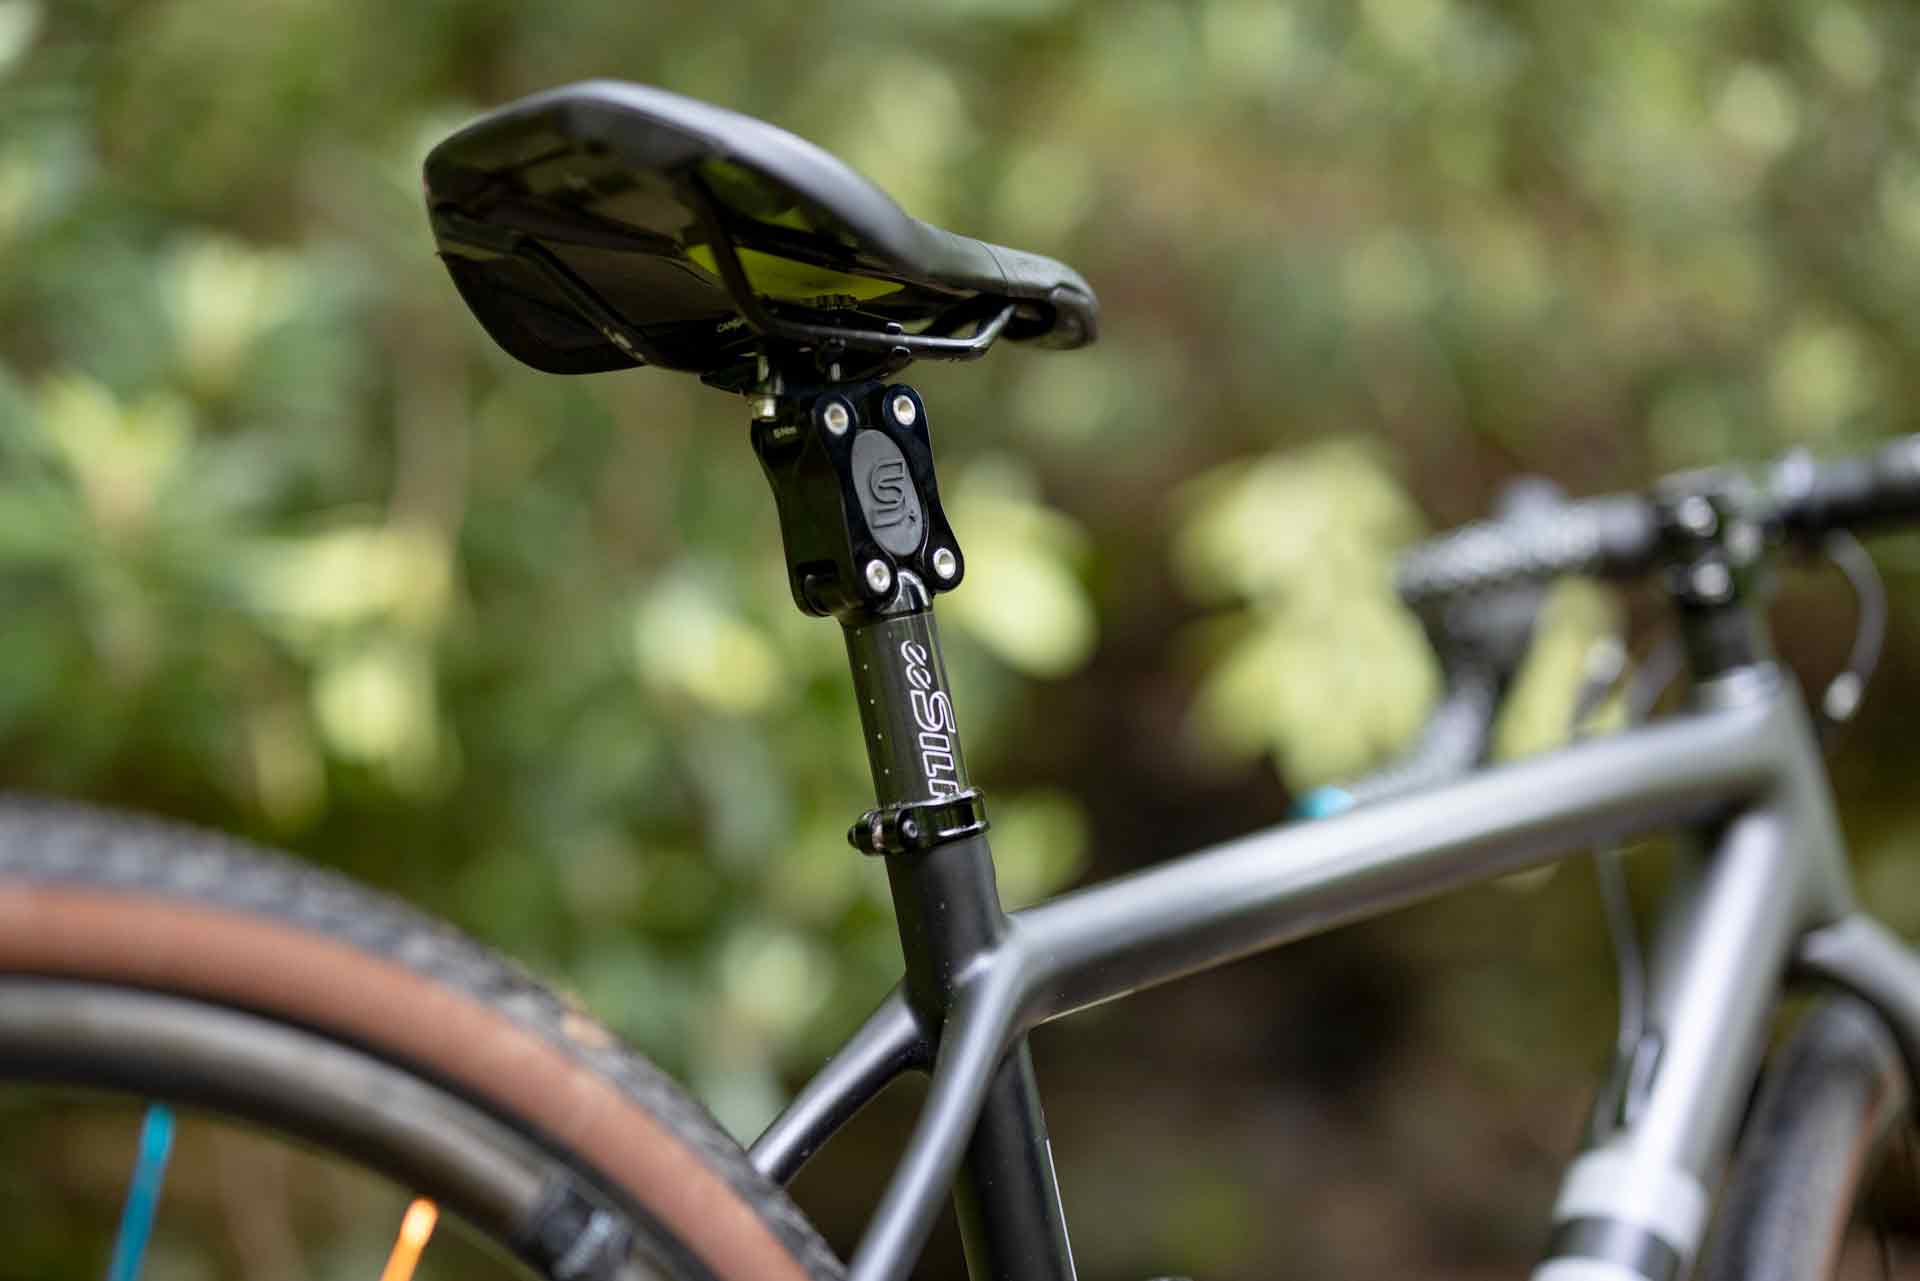 The suspension seatpost was the first product in the cane creek eesilk series.